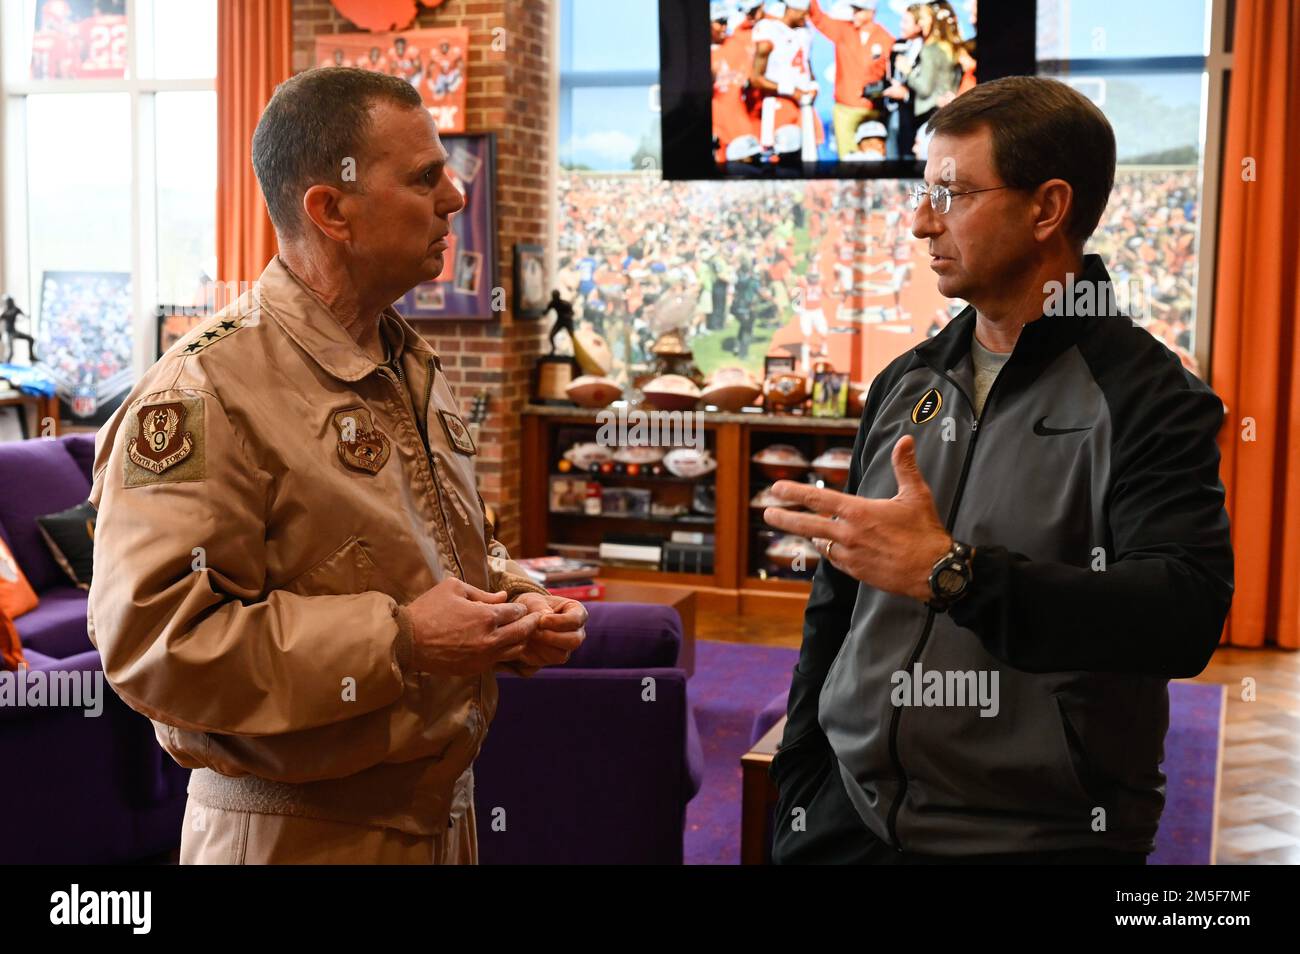 U.S. Air Force Lt. Gen. Greg Guillot, Ninth Air Force (Air Forces Central) commander, speaks to Dabo Swinney, Clemson University Football head coach, during an engagement in South Carolina, March 10, 2022. Guillot spoke with Swinney about leadership, teamwork, and the value of individual development within large organizations. Stock Photo